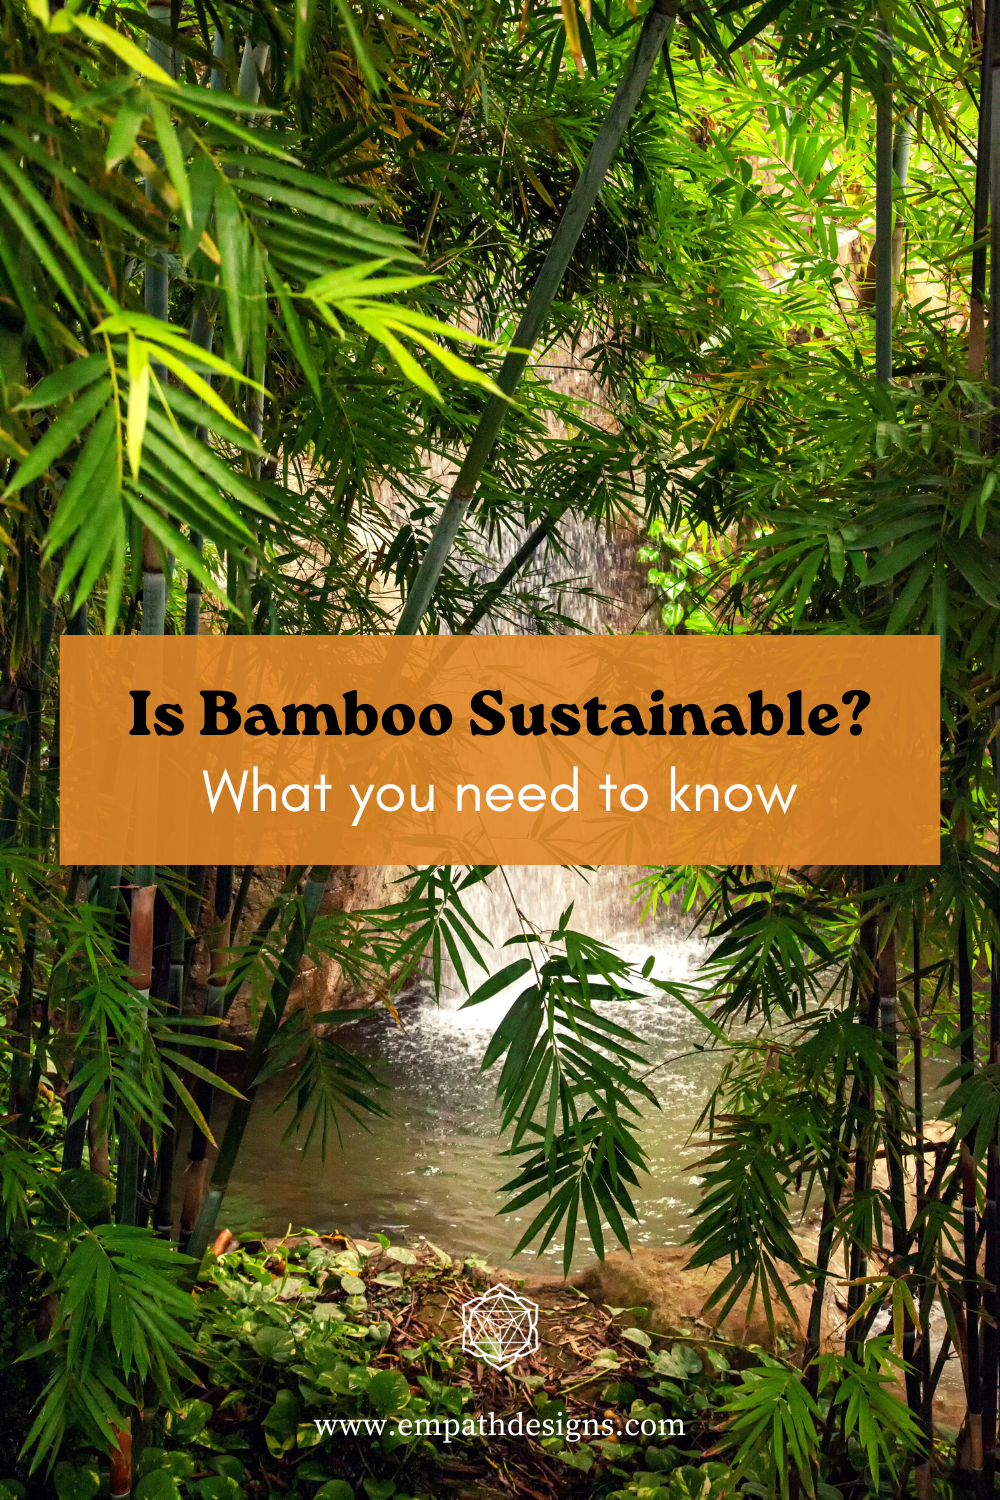 Bamboo and Sustainability: An Overview